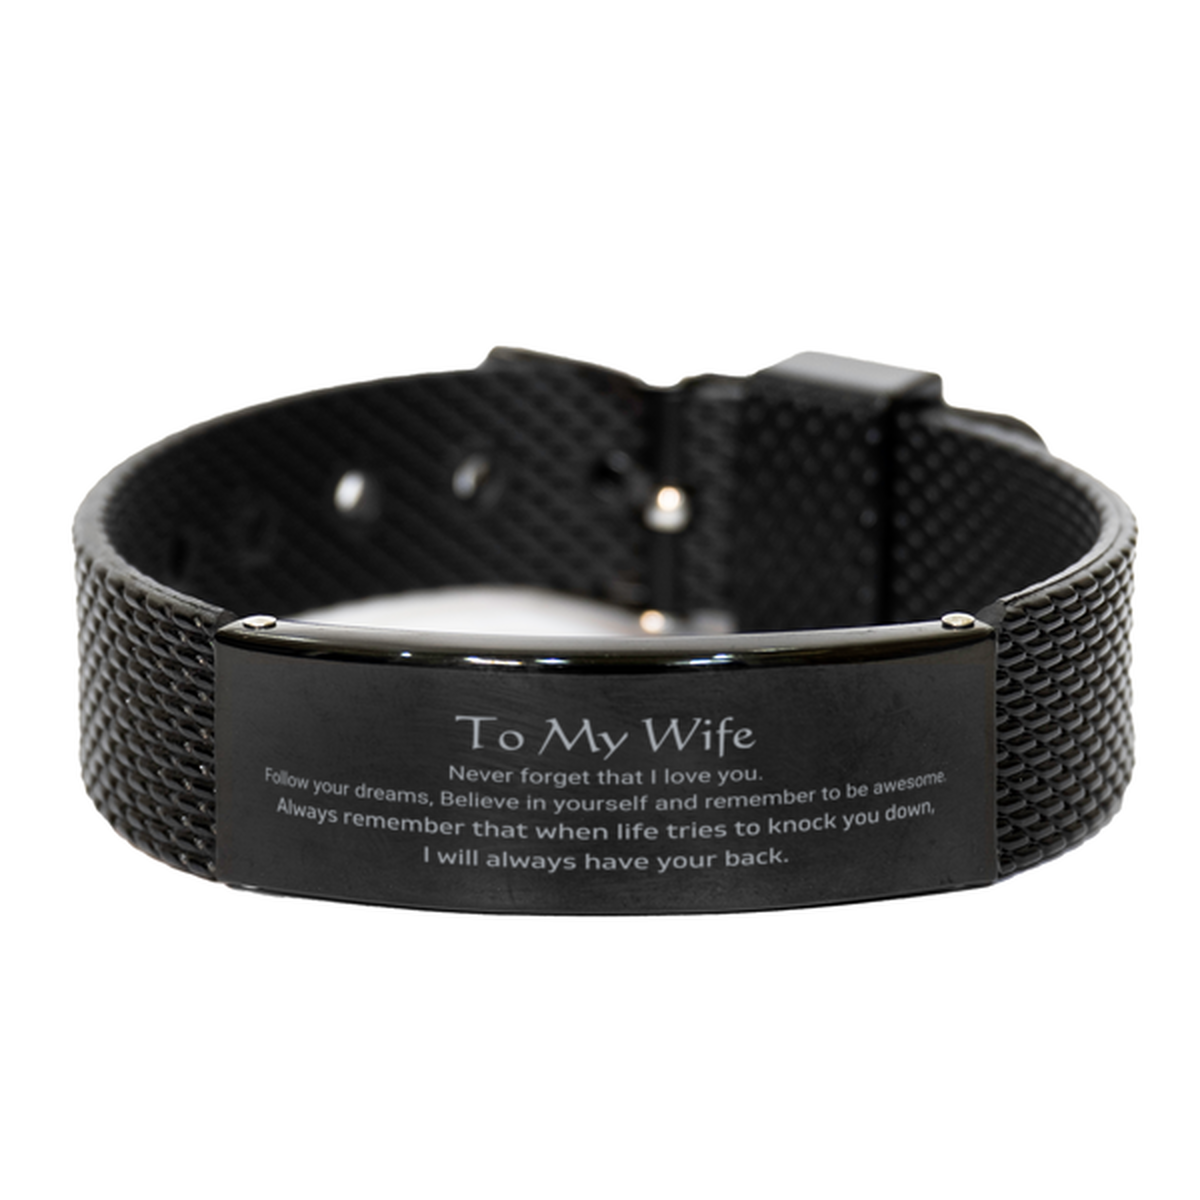 Inspirational Gifts for Wife, Follow your dreams, Believe in yourself, Wife Black Shark Mesh Bracelet, Birthday Christmas Unique Gifts For Wife